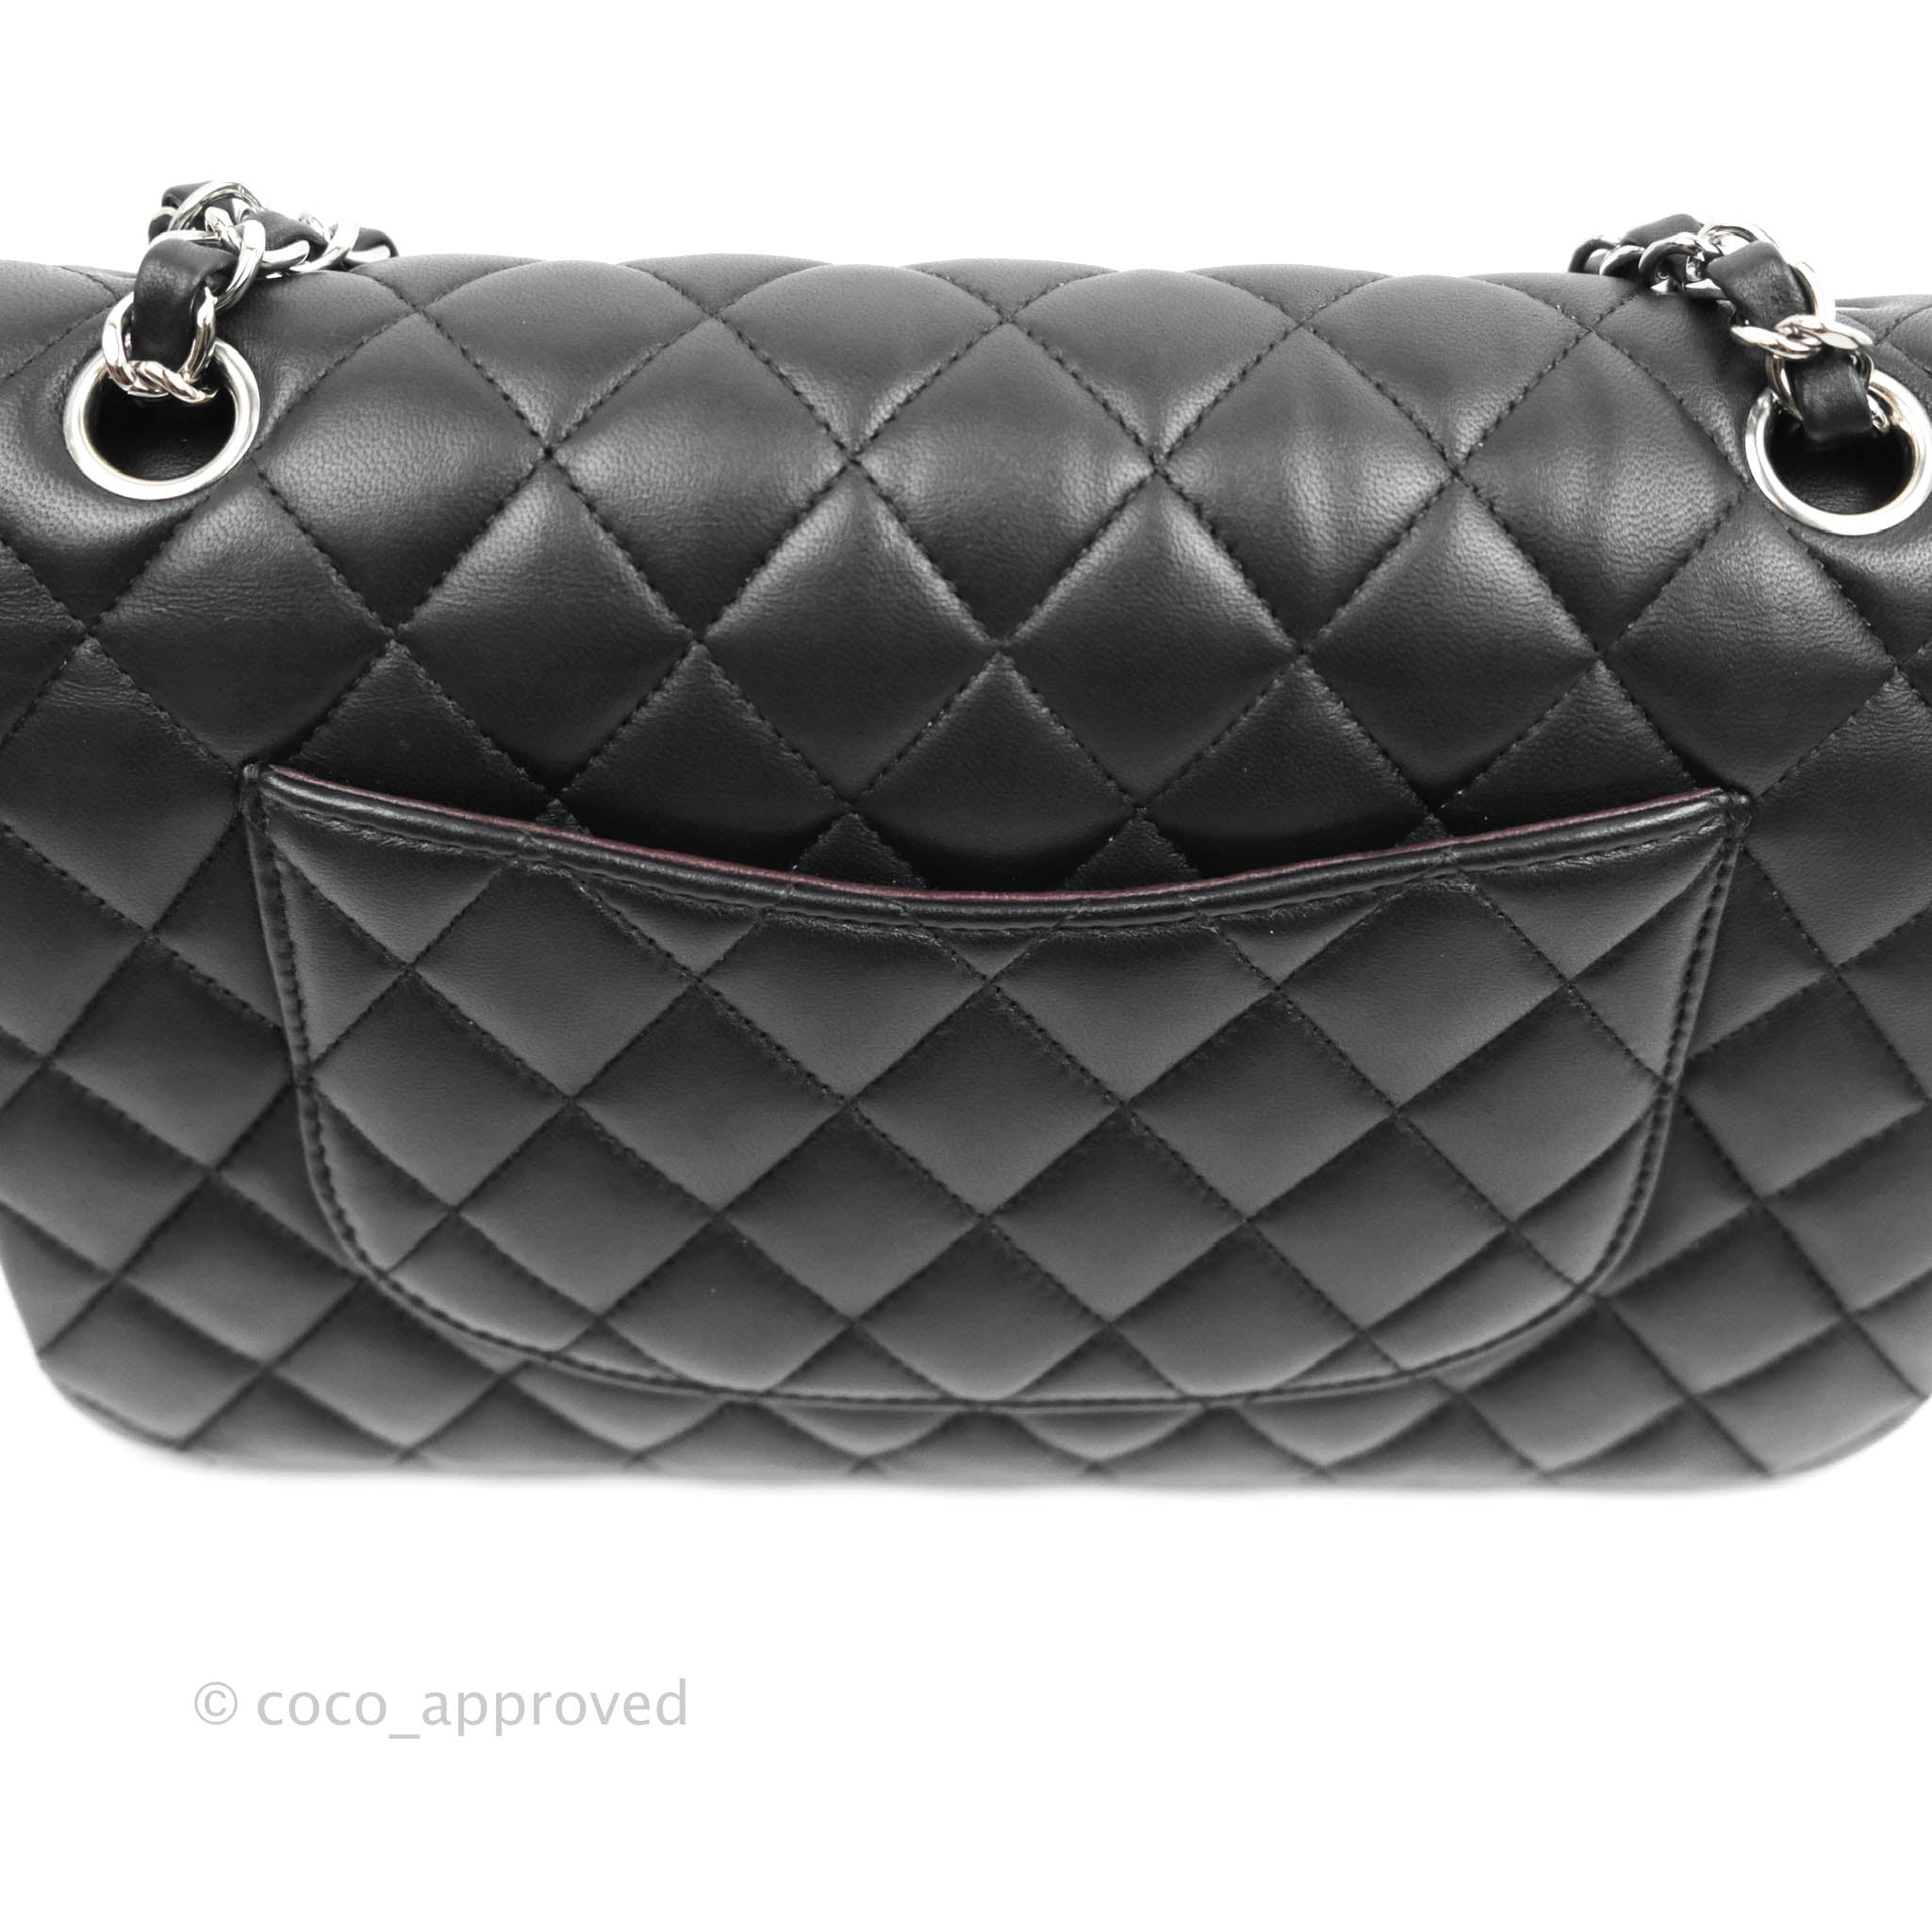 Canada Chanel Bag Price List Reference Guide  Spotted Fashion